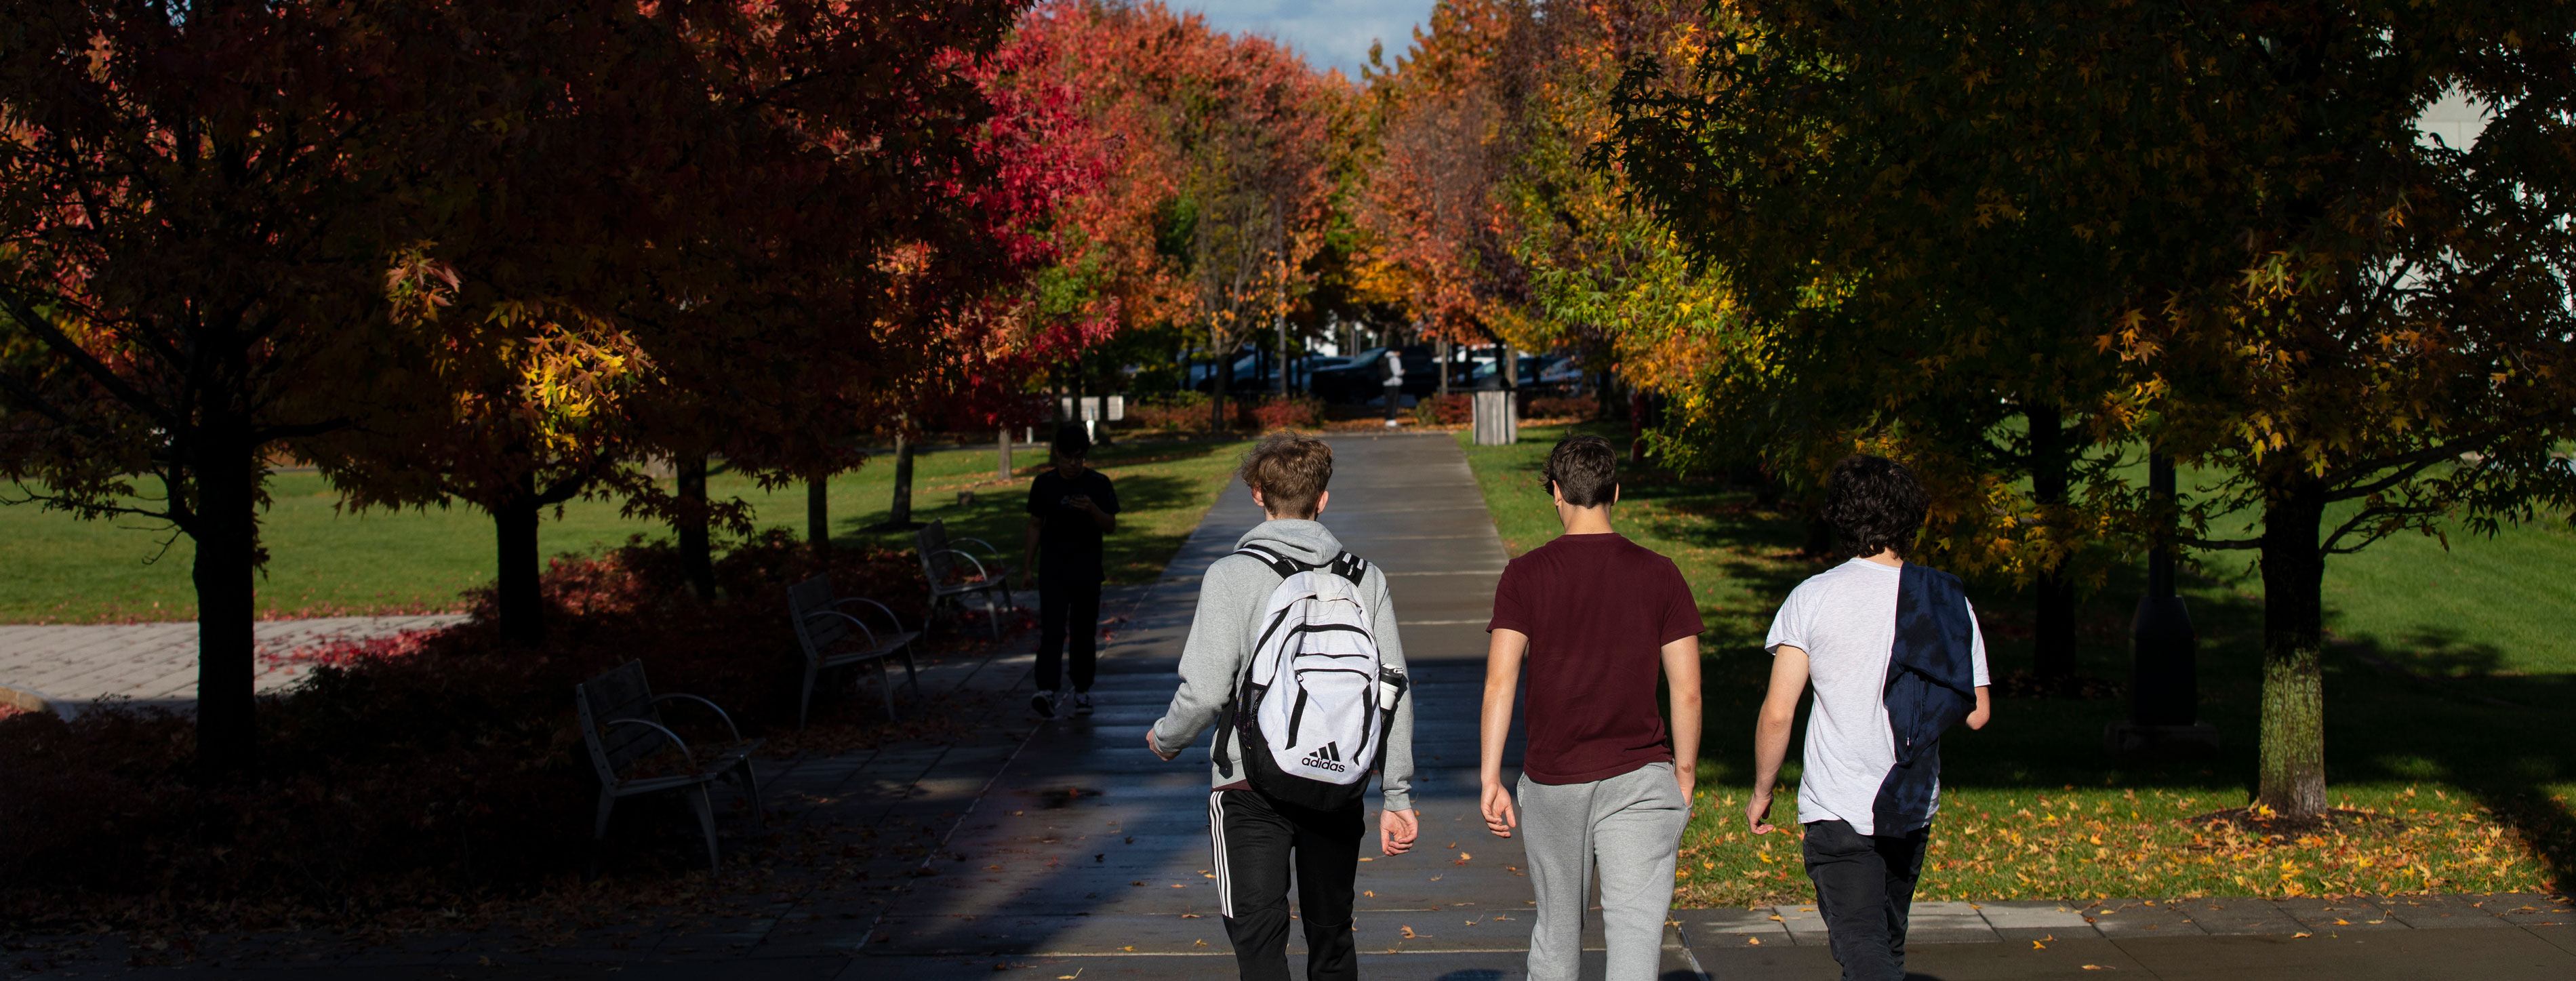 Three students walk along a paved campus path surrounded by trees with fall foliage.